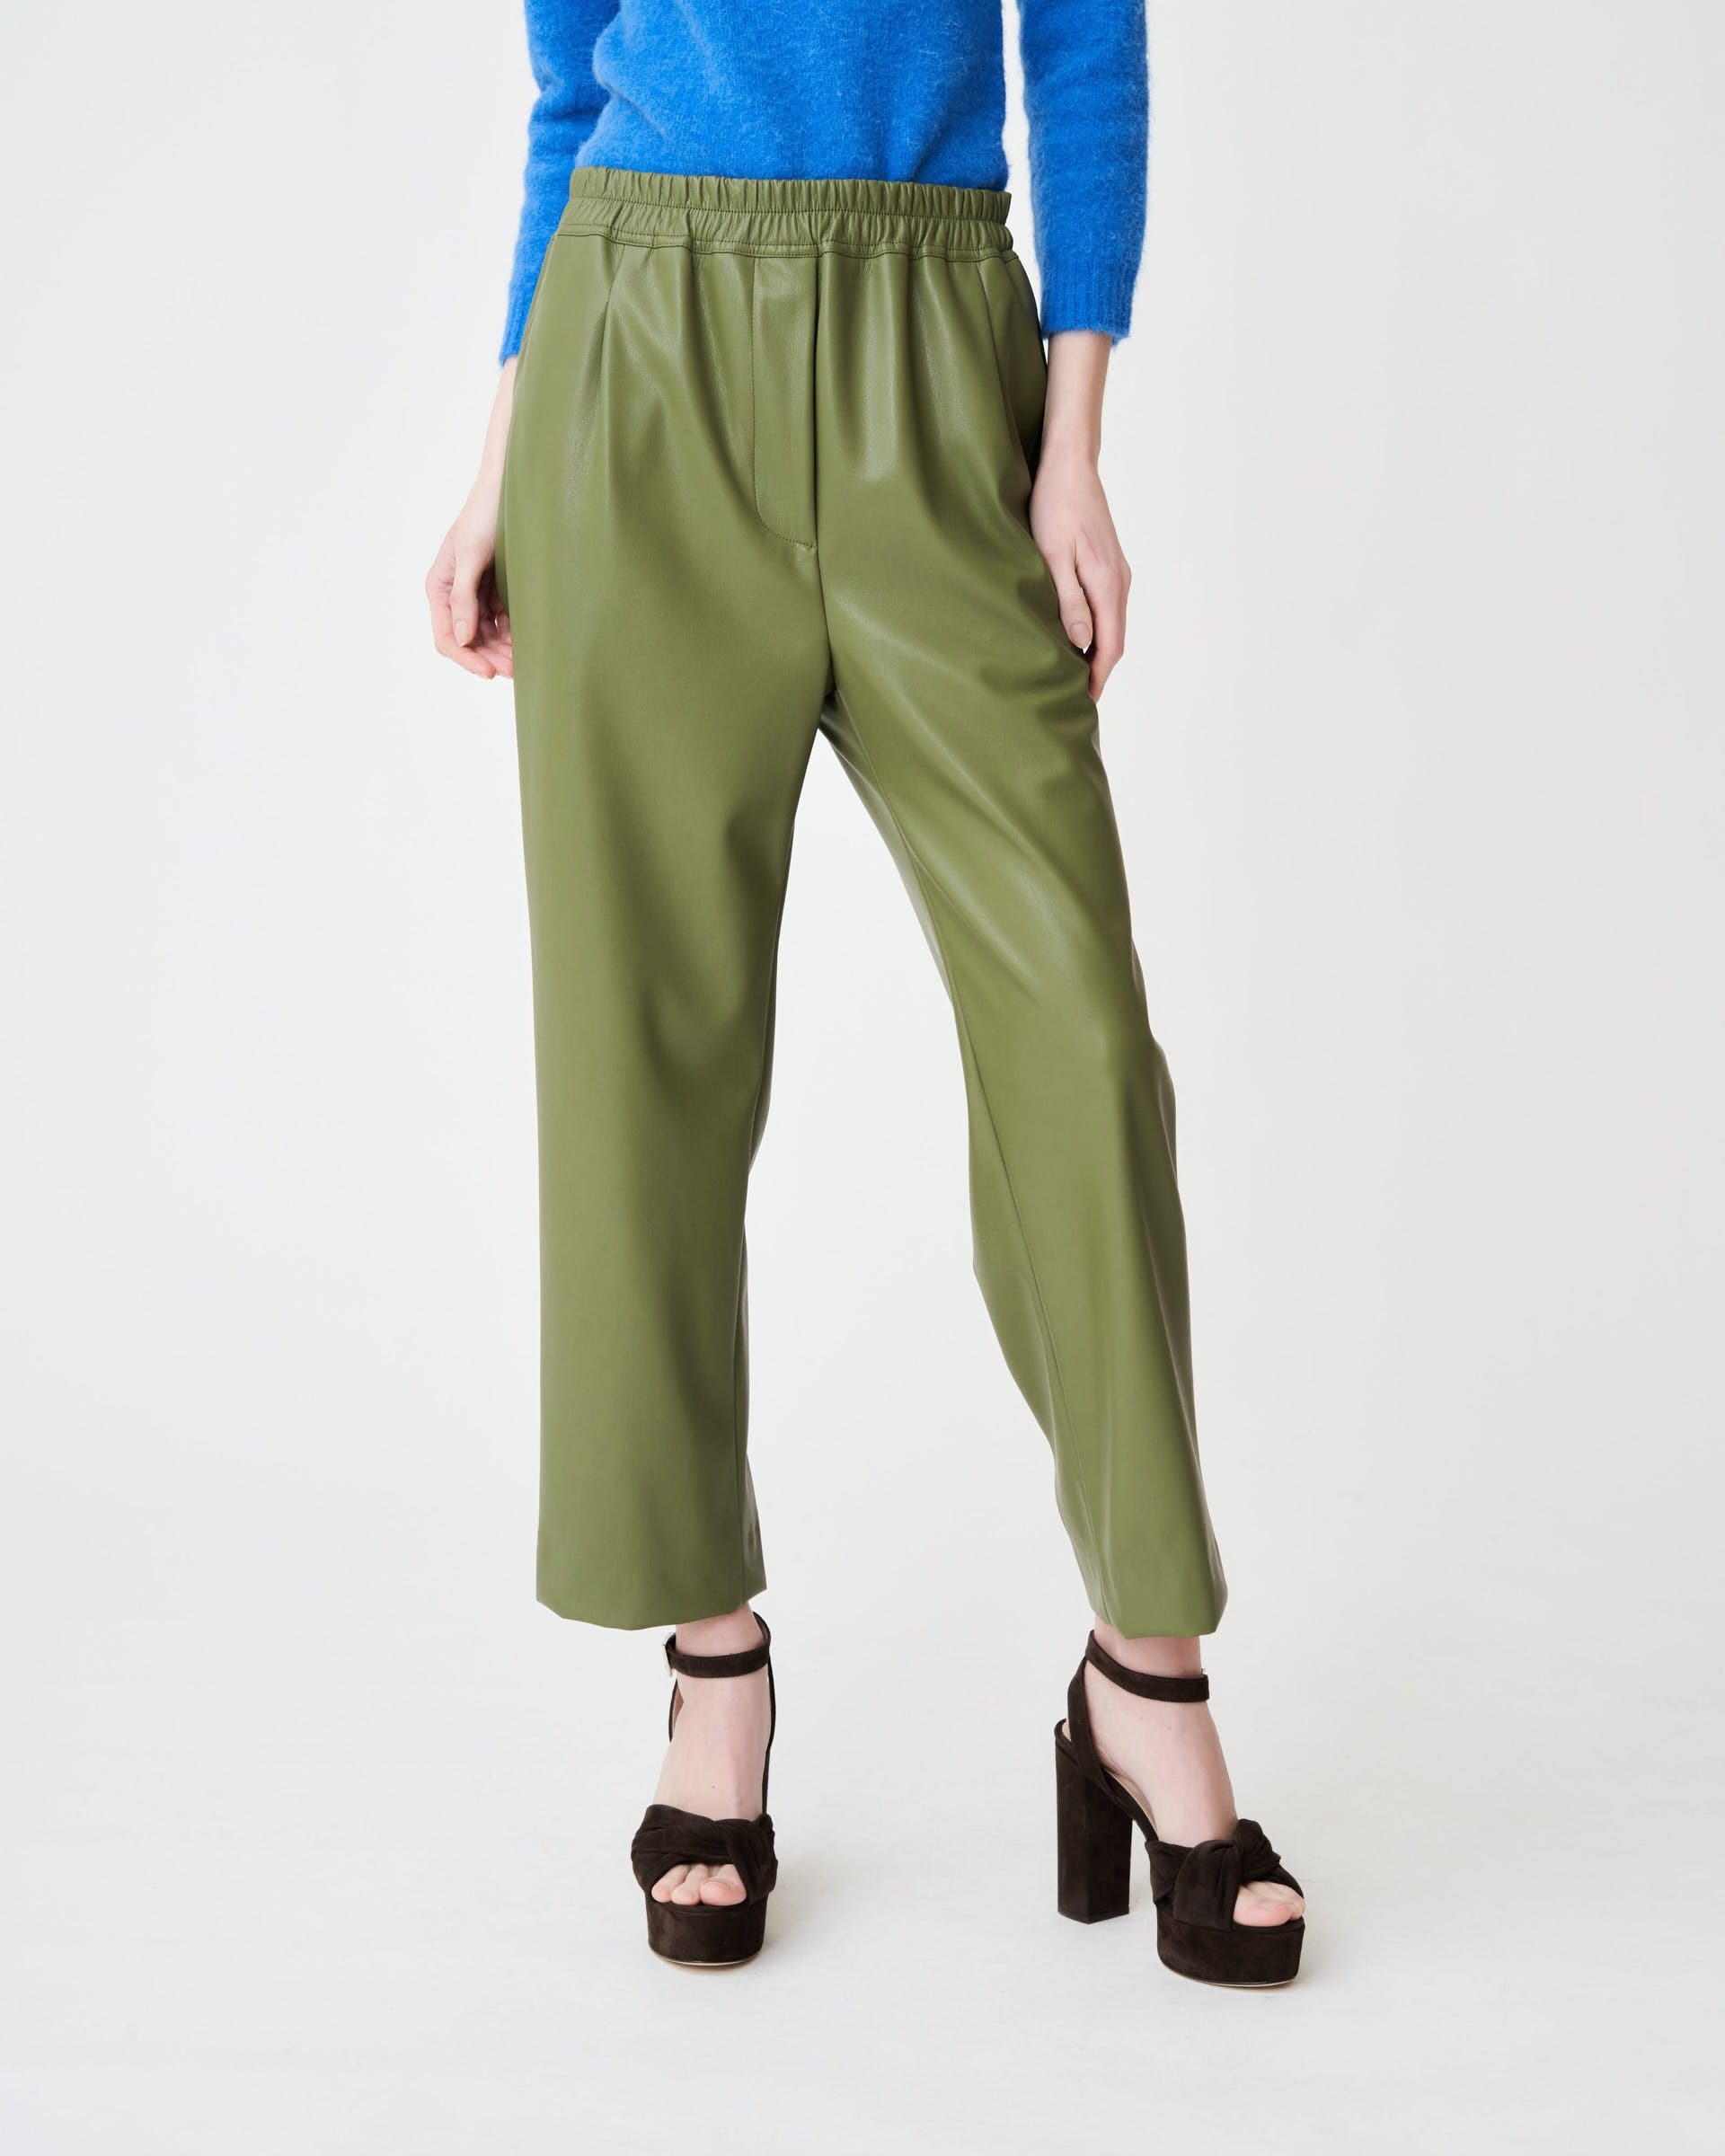 The Market Store | Pants With Elastic